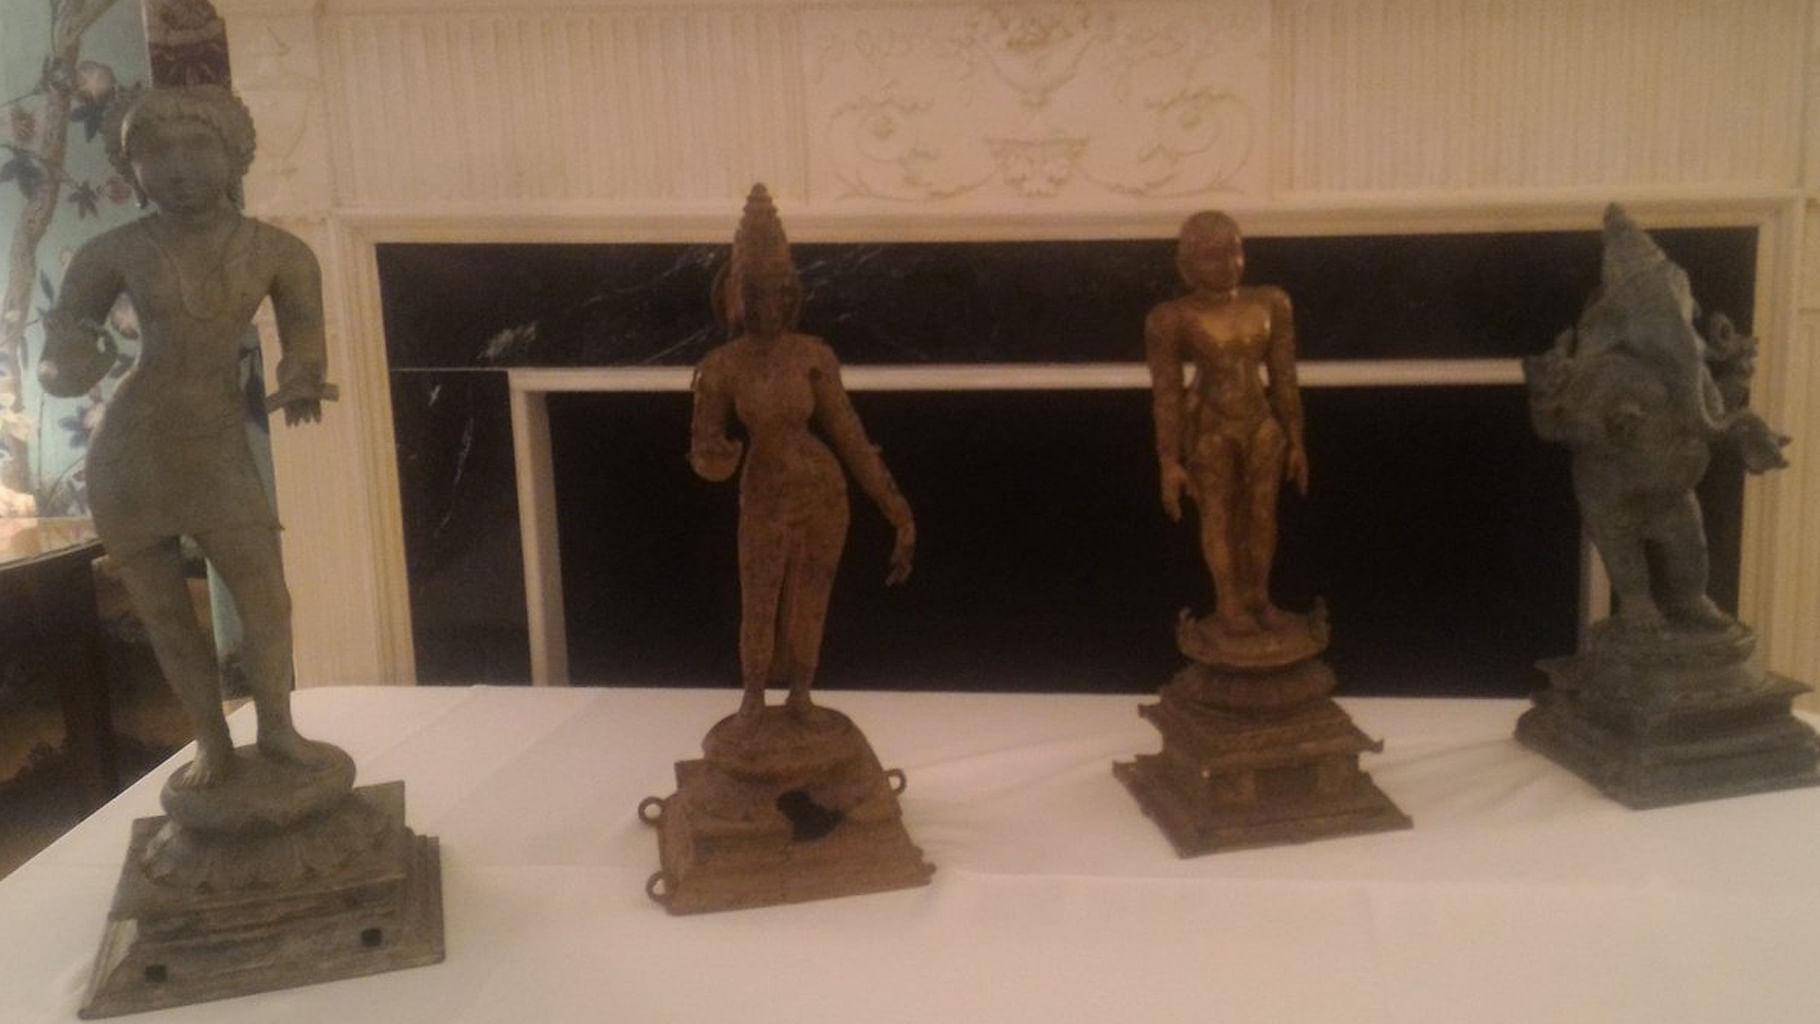 The US returned over 200 cultural artefacts estimated at $100 million to India. (Photo: ANI)